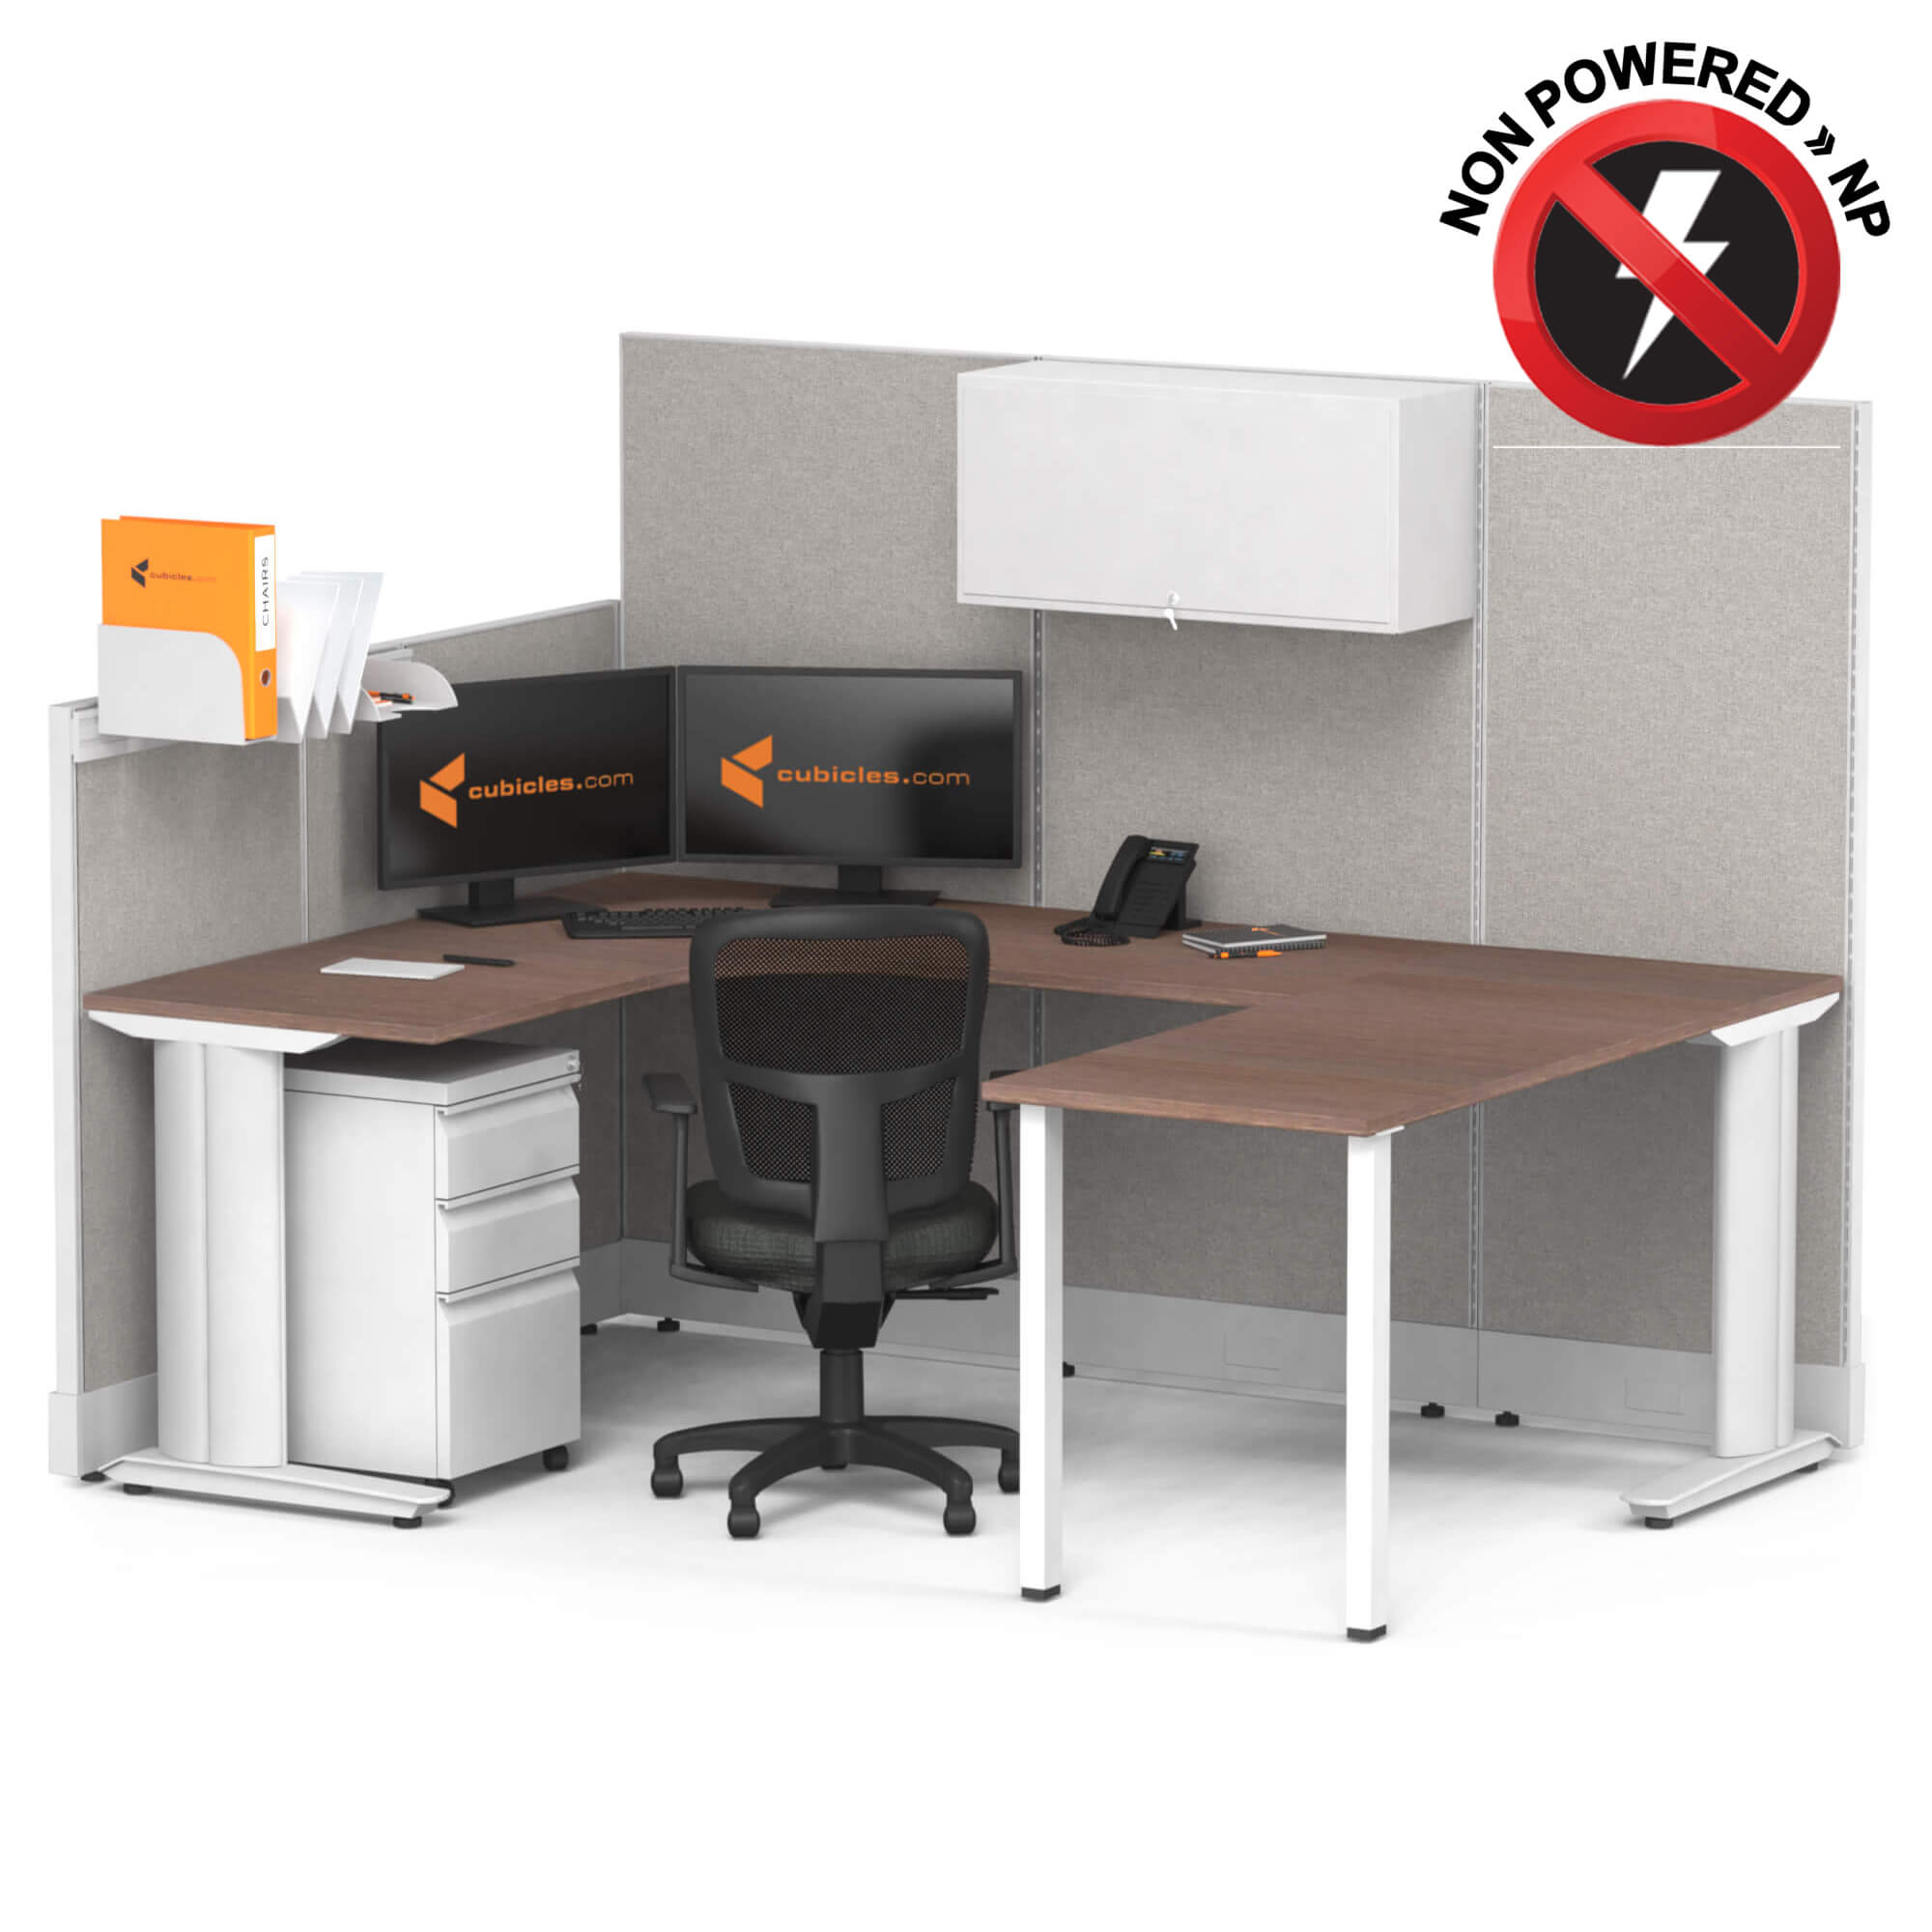 Cubicle desk u shaped with storage 1pack non powered sign